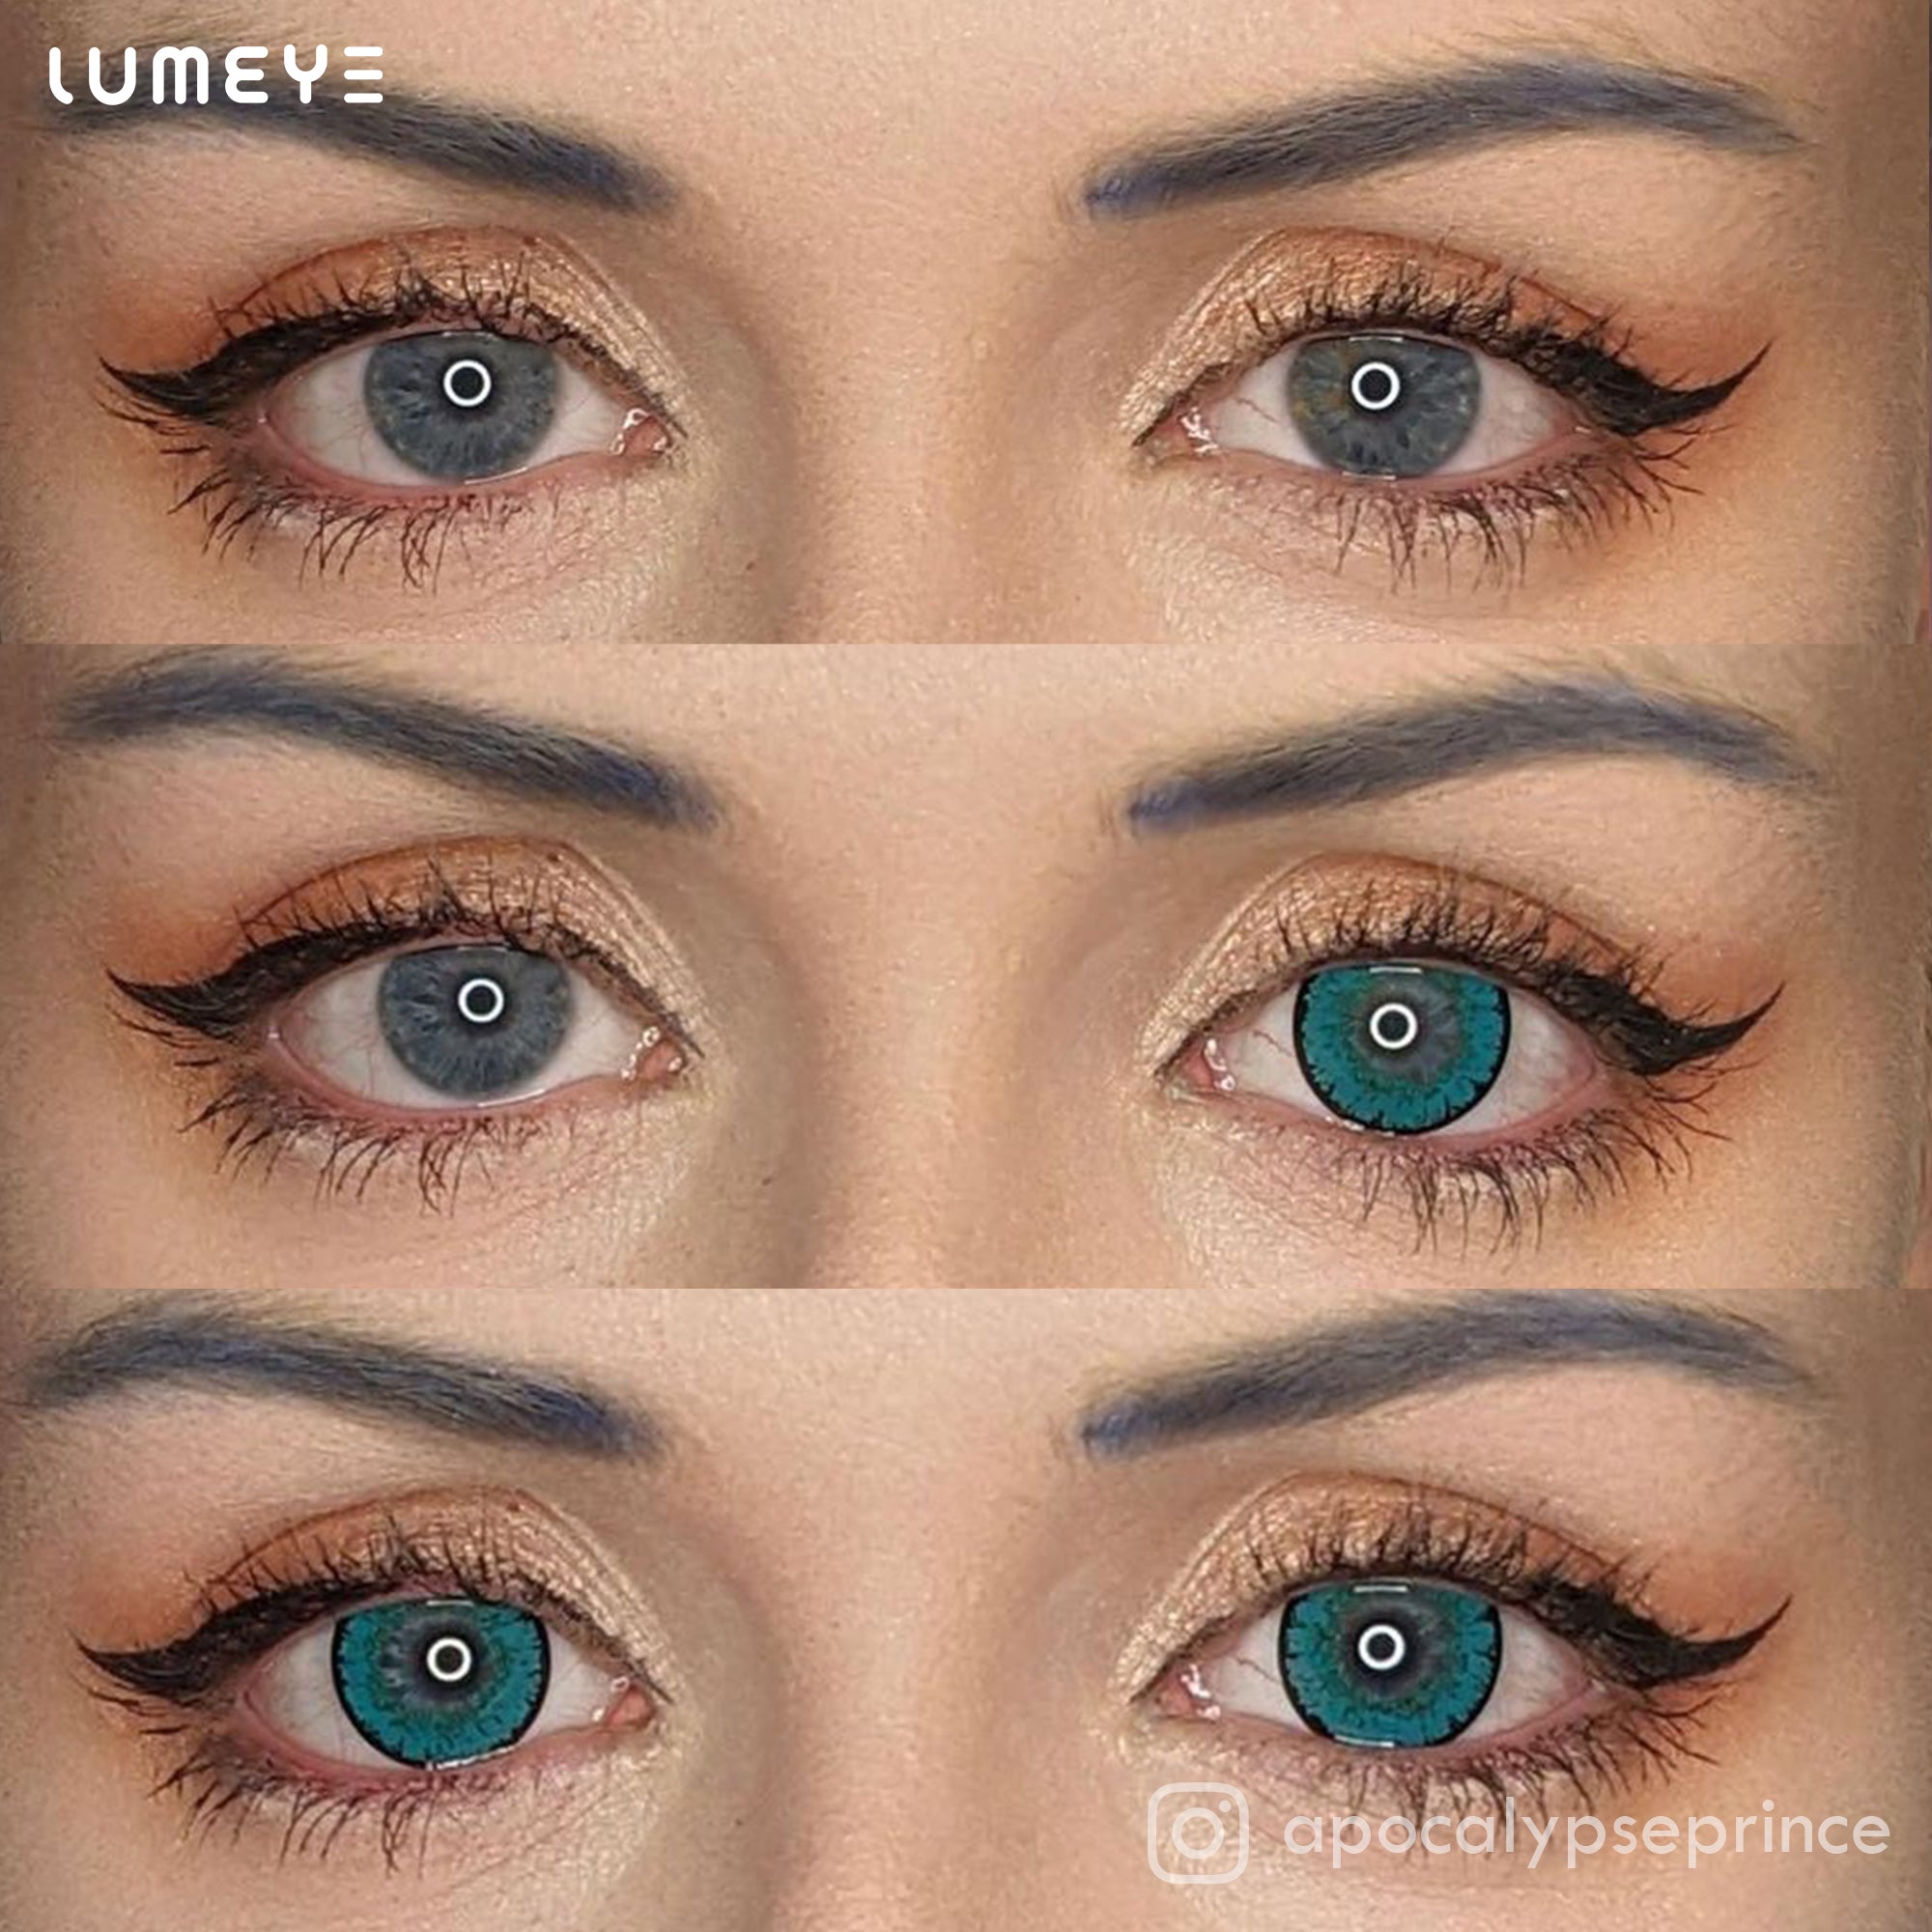 Best COLORED CONTACTS - LUMEYE Candy Melon Green Colored Contact Lenses - LUMEYE